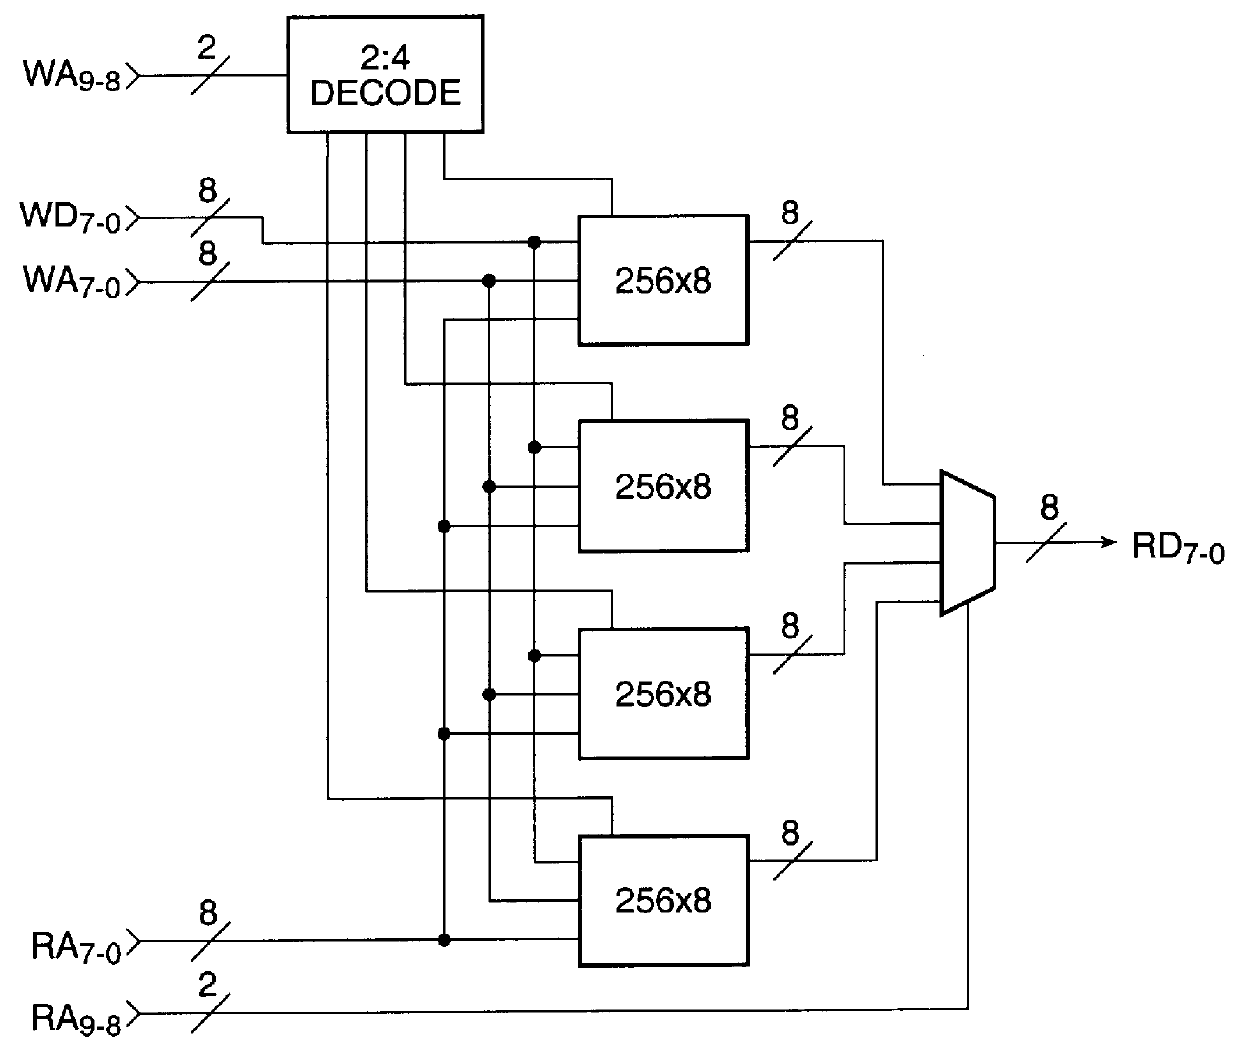 SRAM bus architecture and interconnect to an FPGA